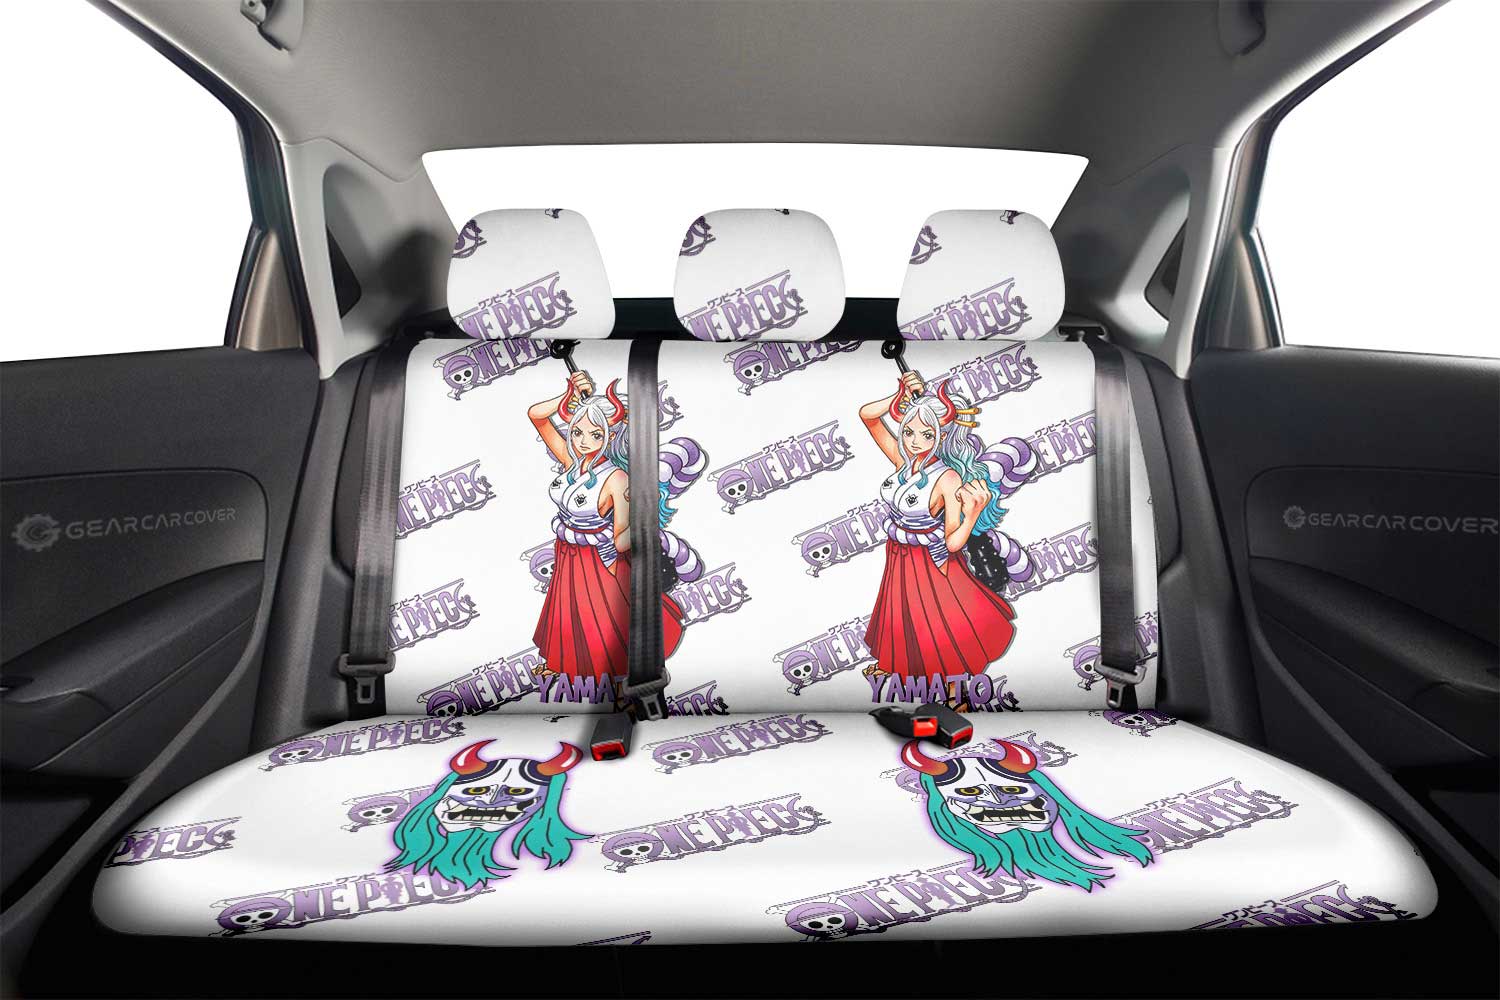 Yamato Car Back Seat Cover Custom One Piece Anime - Gearcarcover - 2